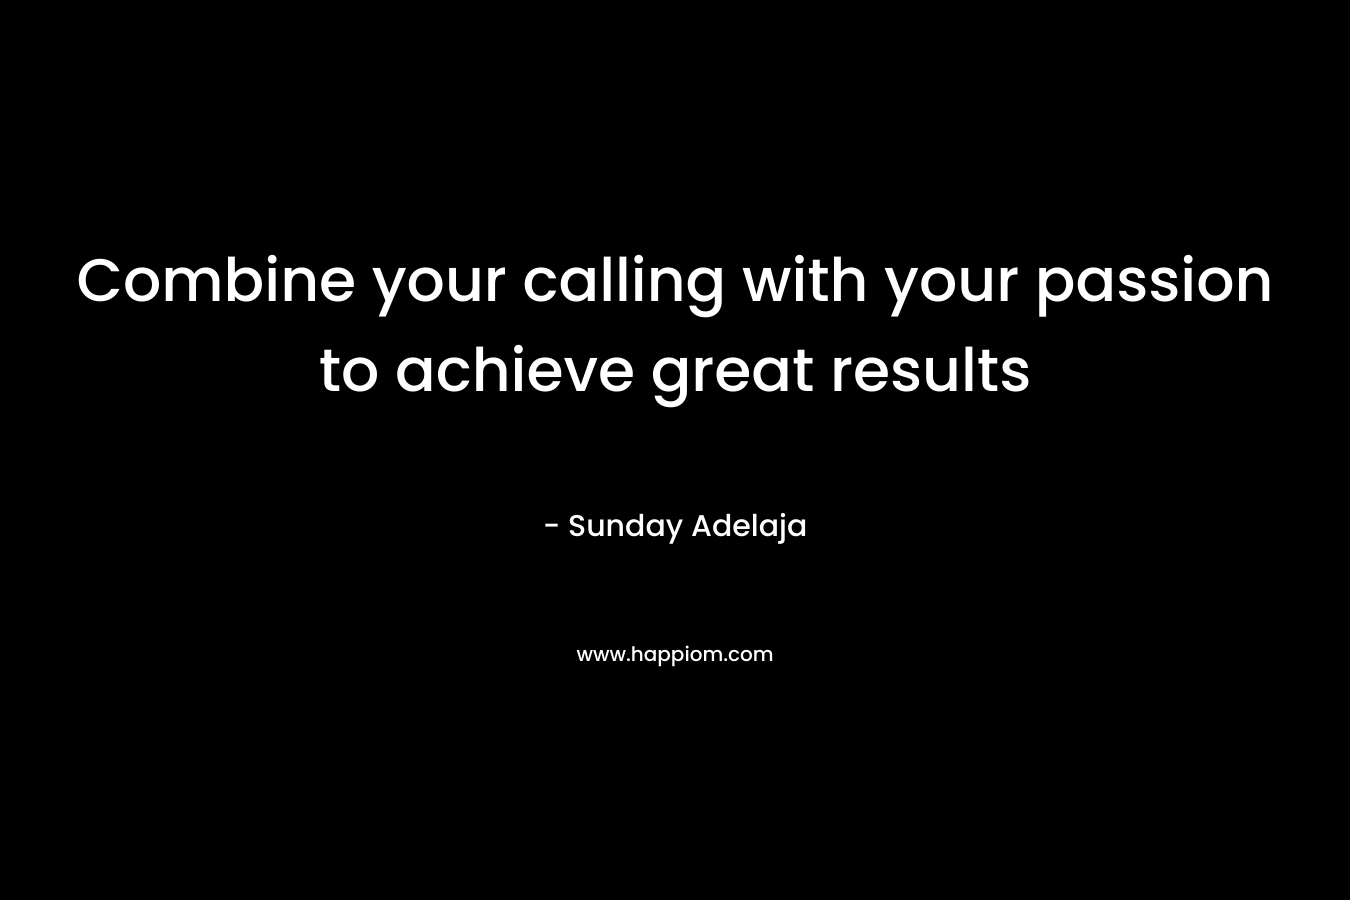 Combine your calling with your passion to achieve great results